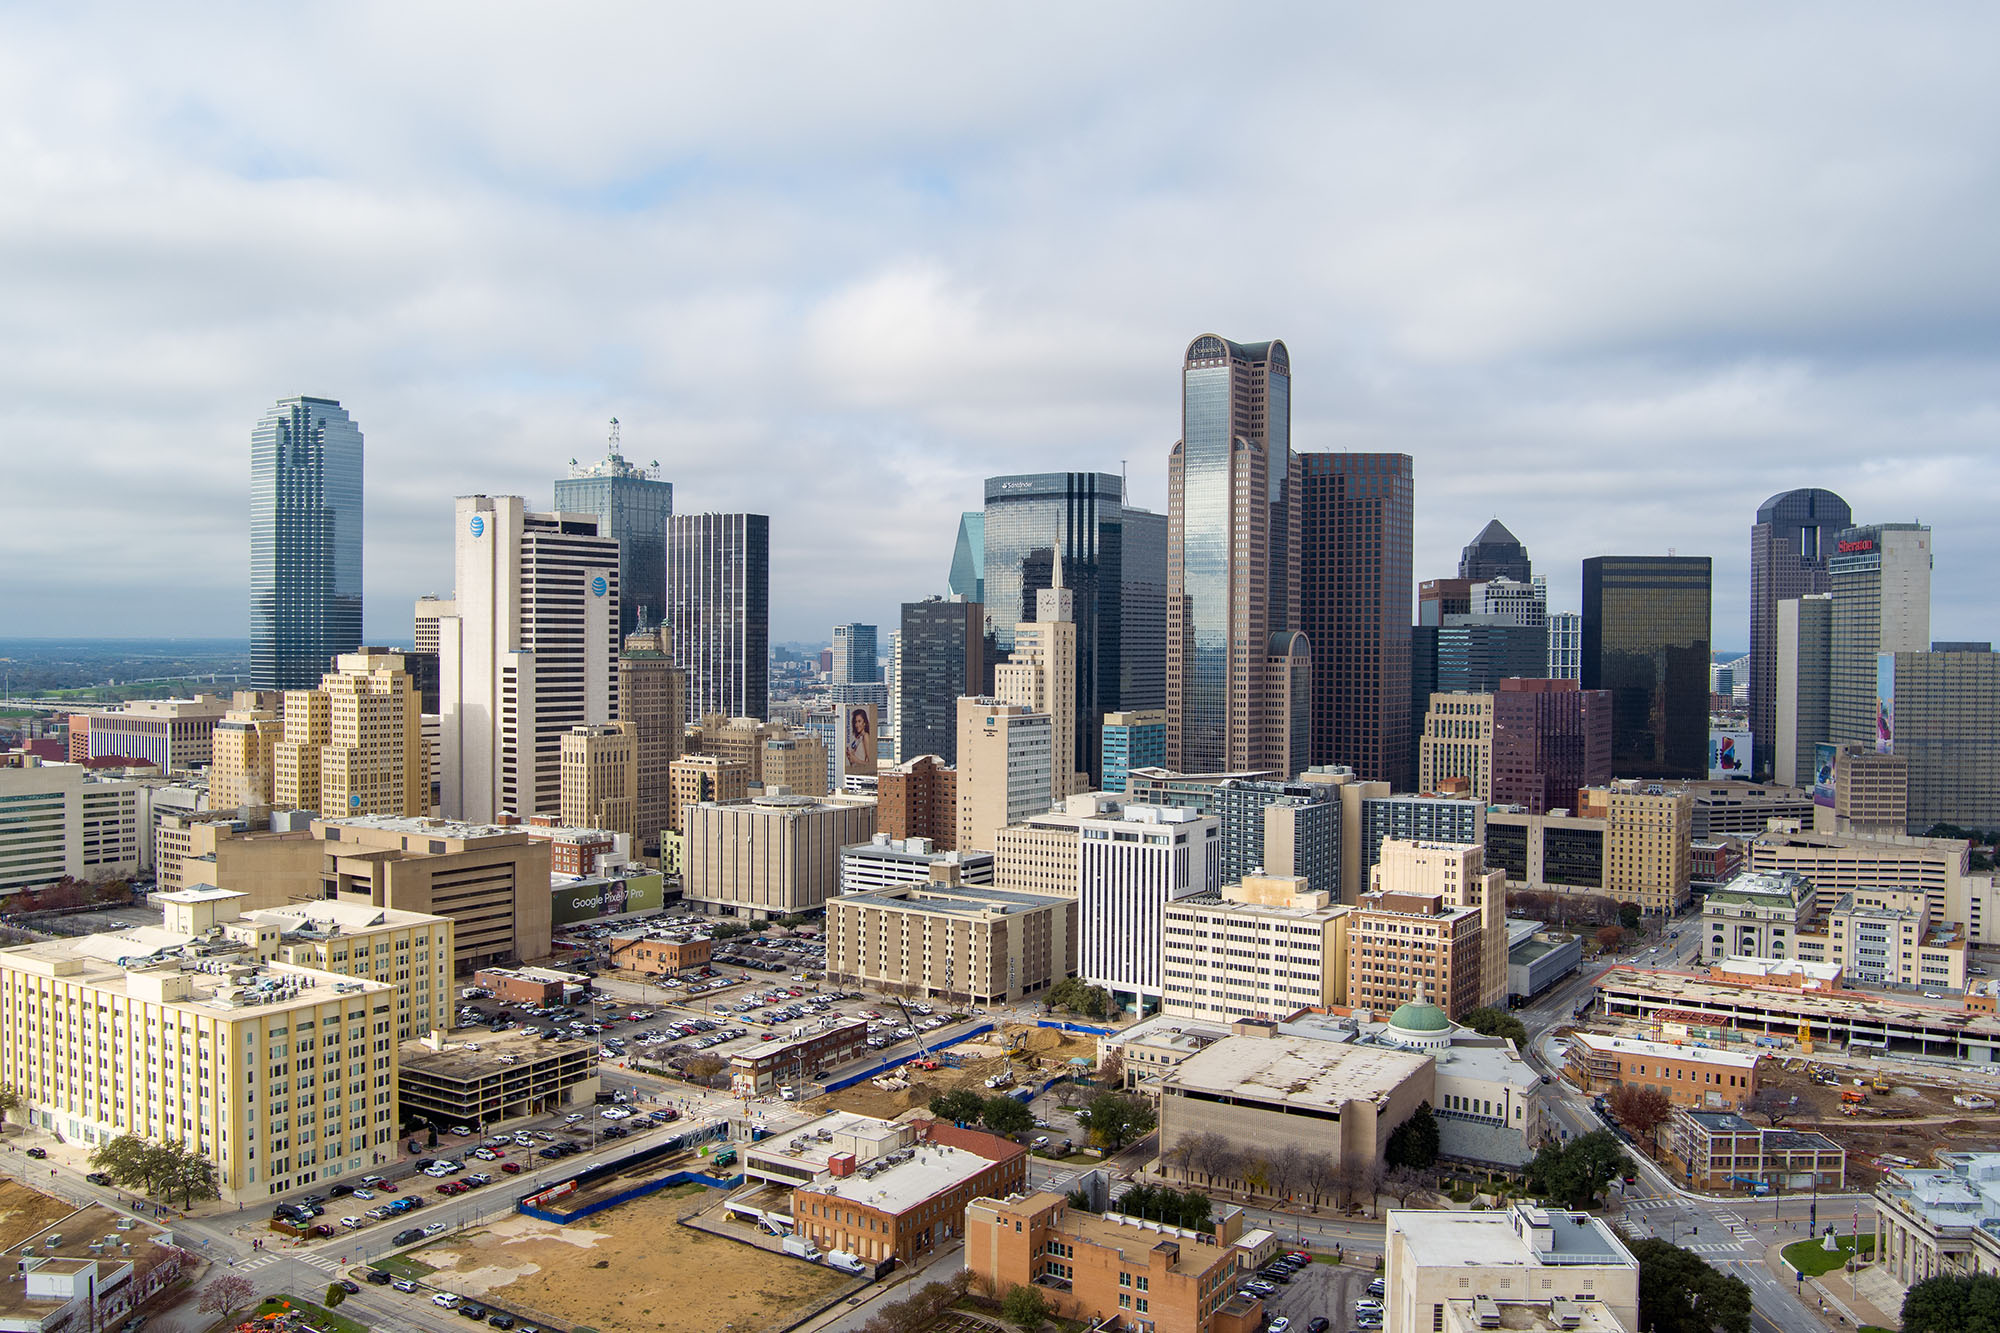 Texas, Get Ready for Helios Visions: Leading Drone Services Provider Expands to Lone Star State